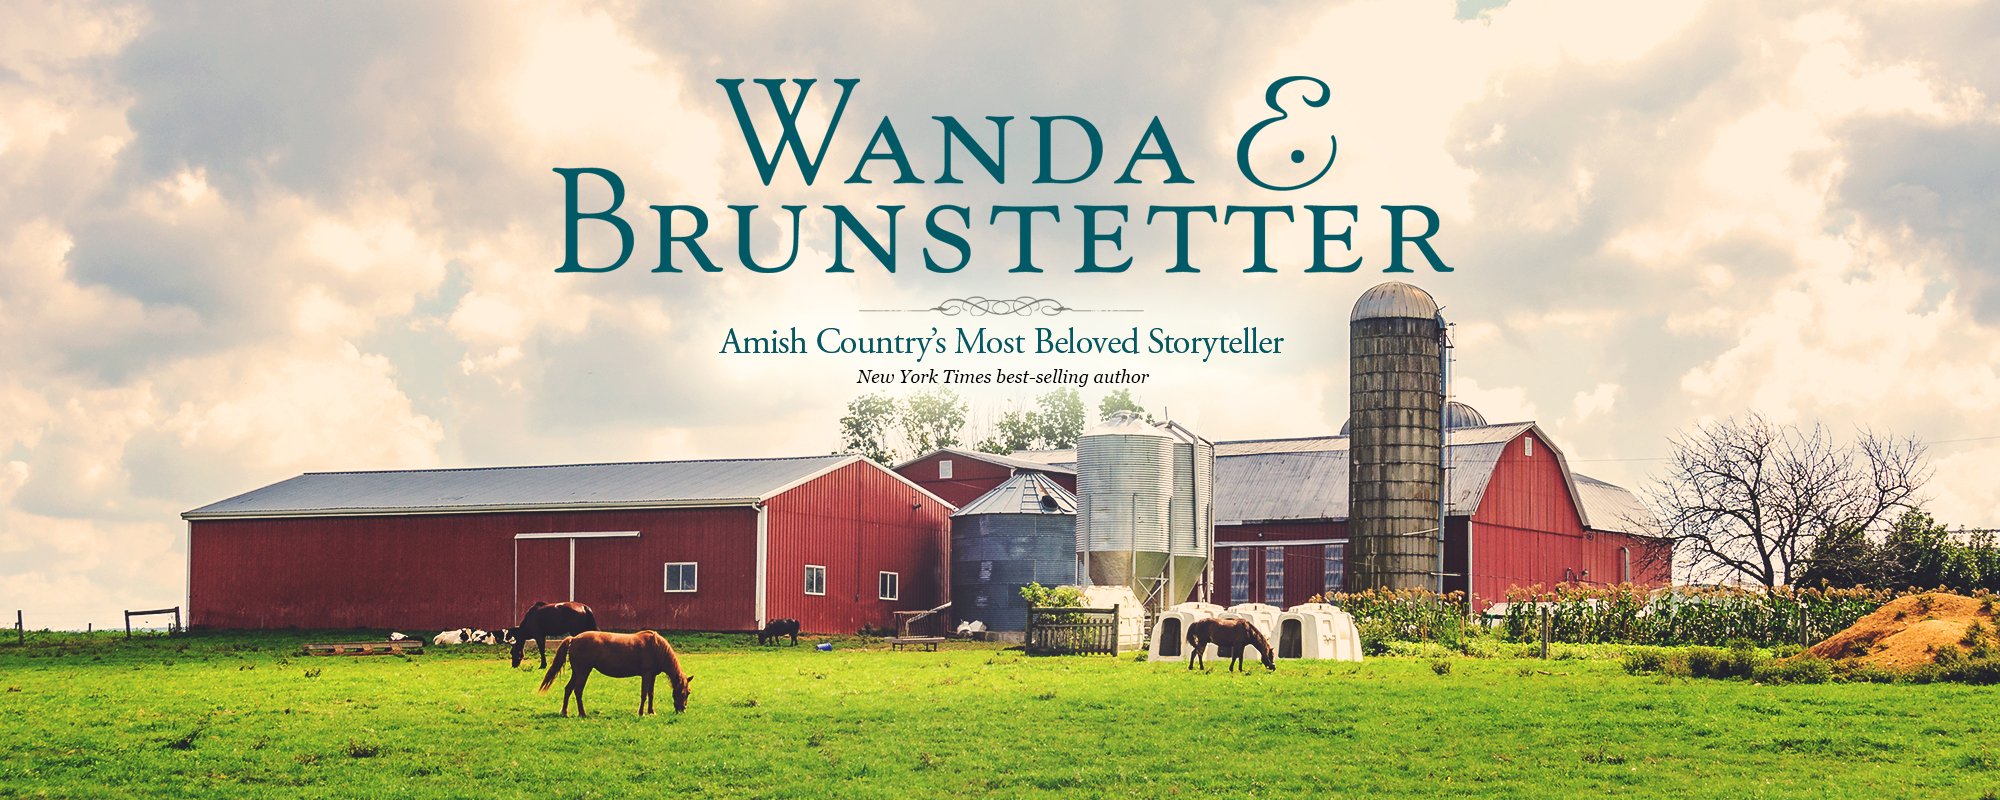 Wanda E. Brunstetter: Amish Country's Most Beloved Storyteller. New York Times best selling author of Amish fiction.